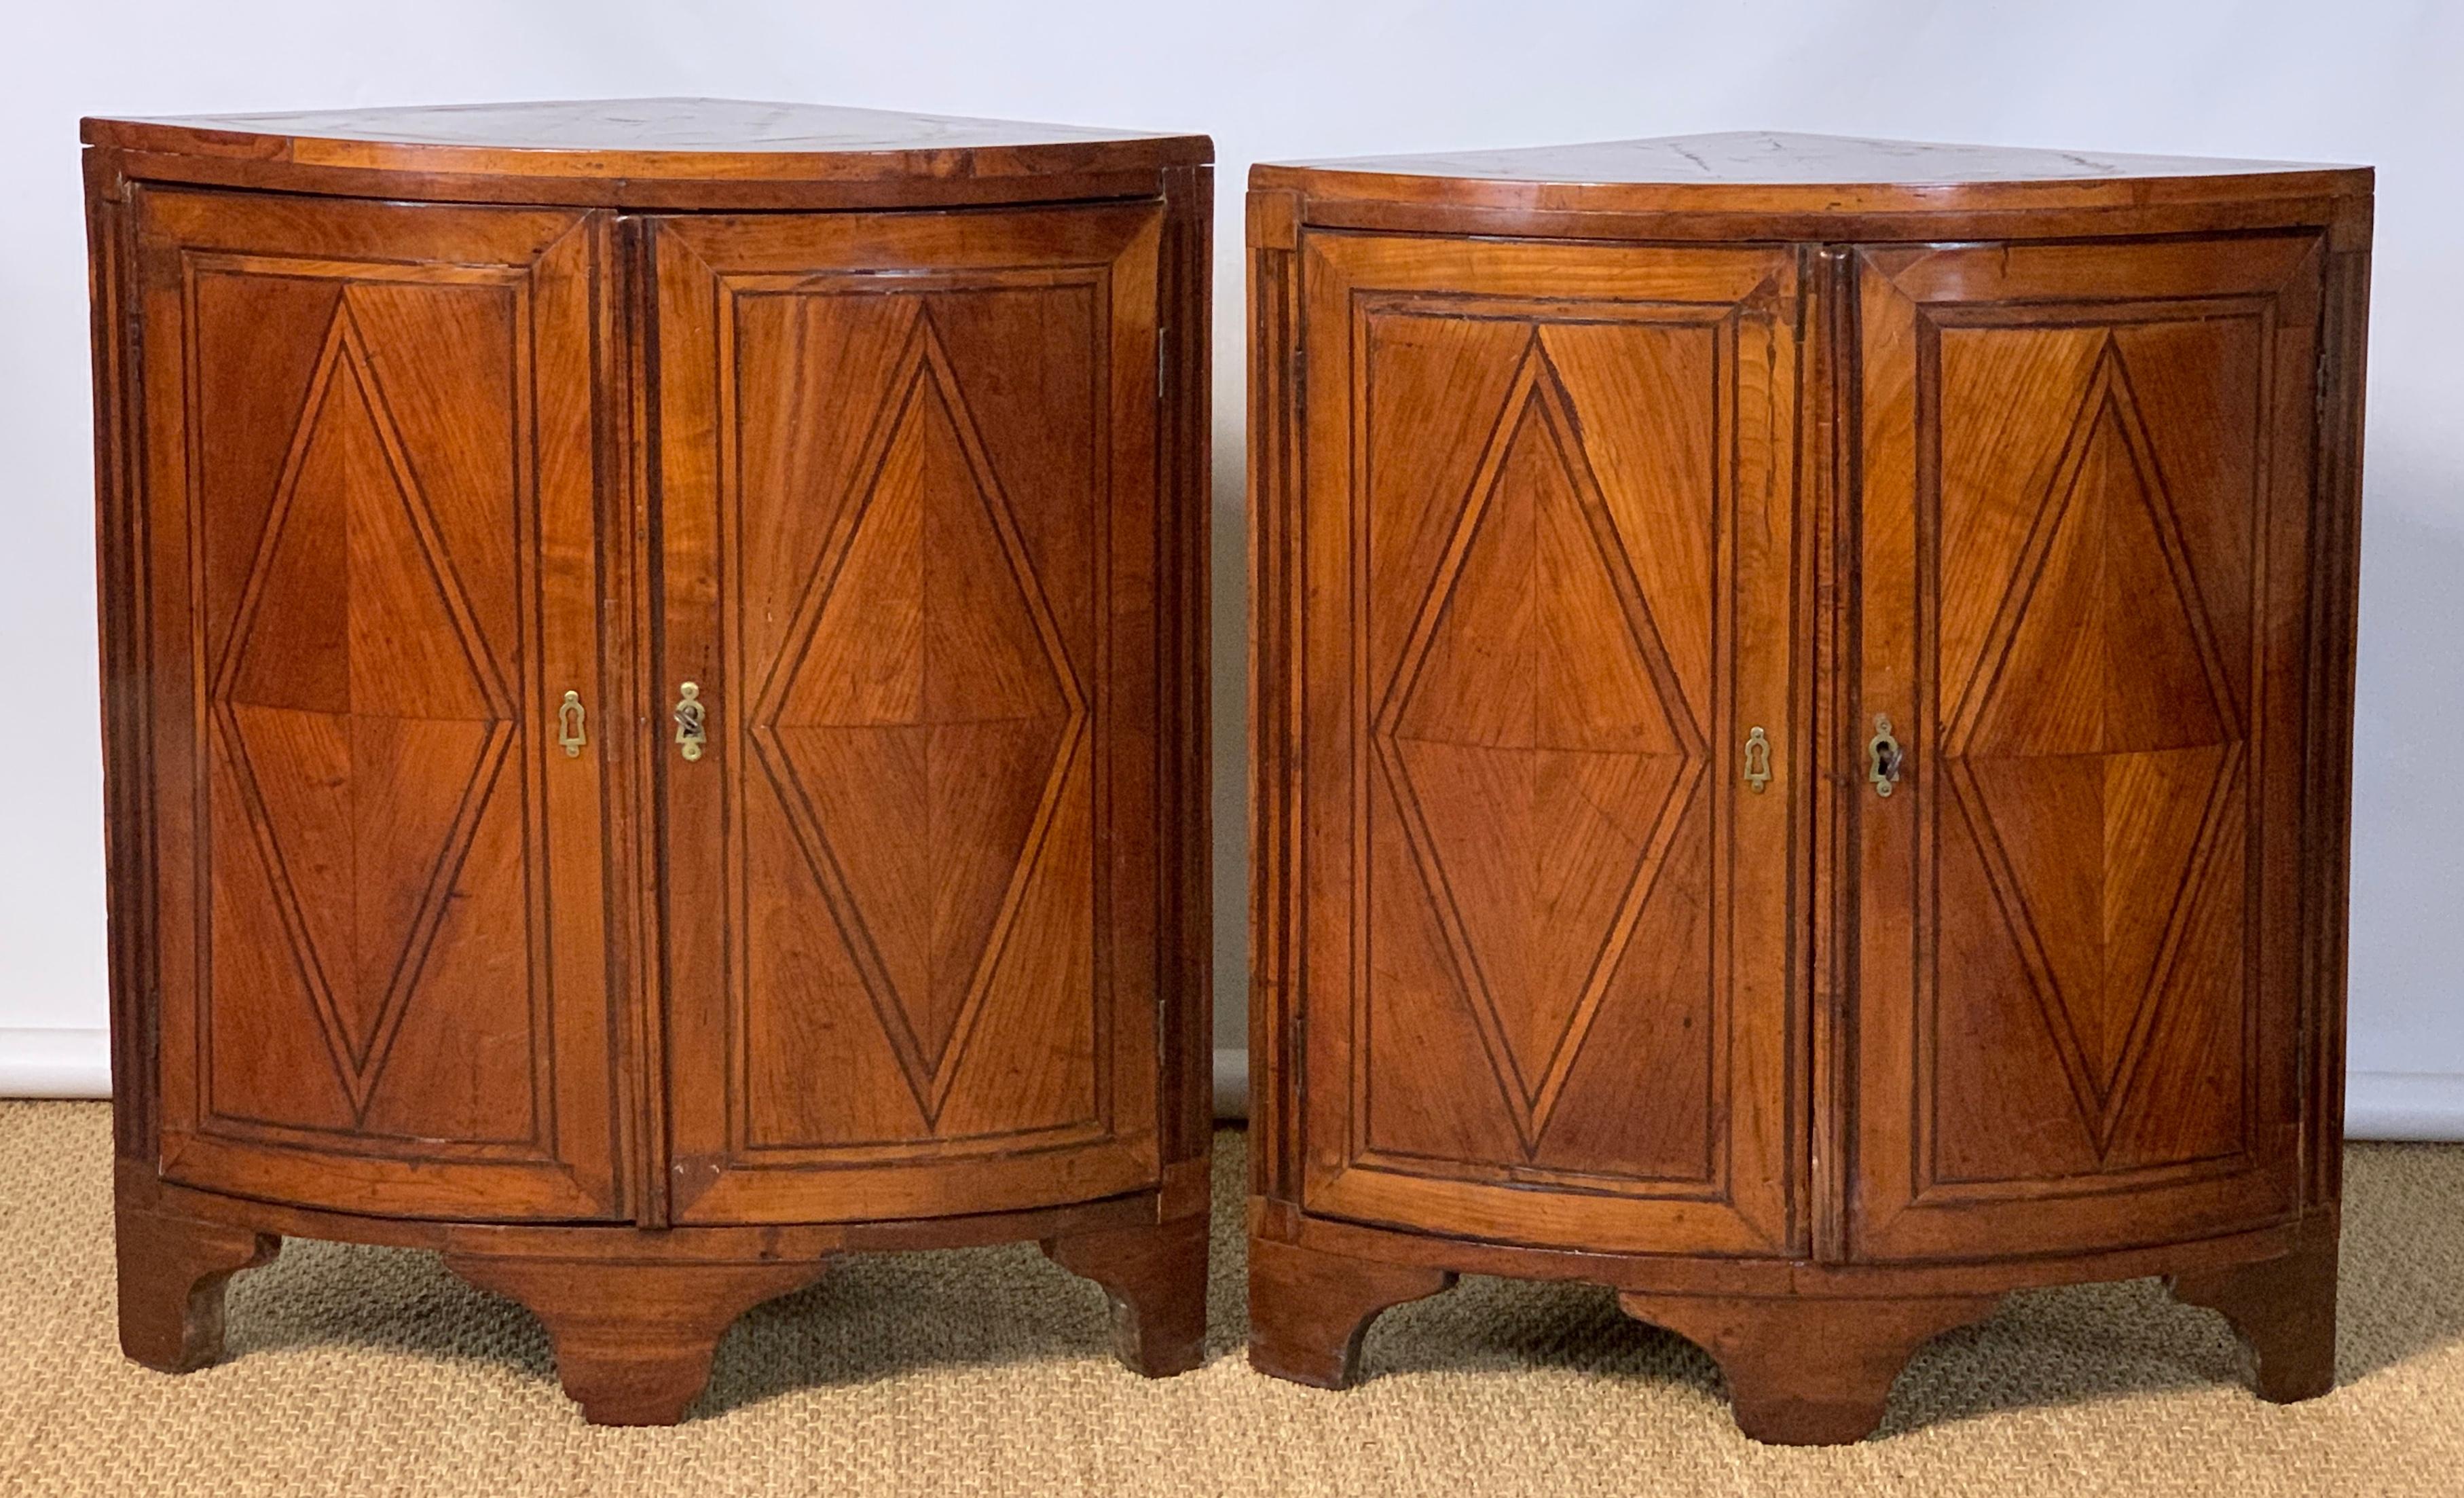 An elegant pair of late 18th century French (Louis XVI) cherrywood bowfront corner cabinets beautifully accented with ebony stringing throughout and later heathered grey marble tops.